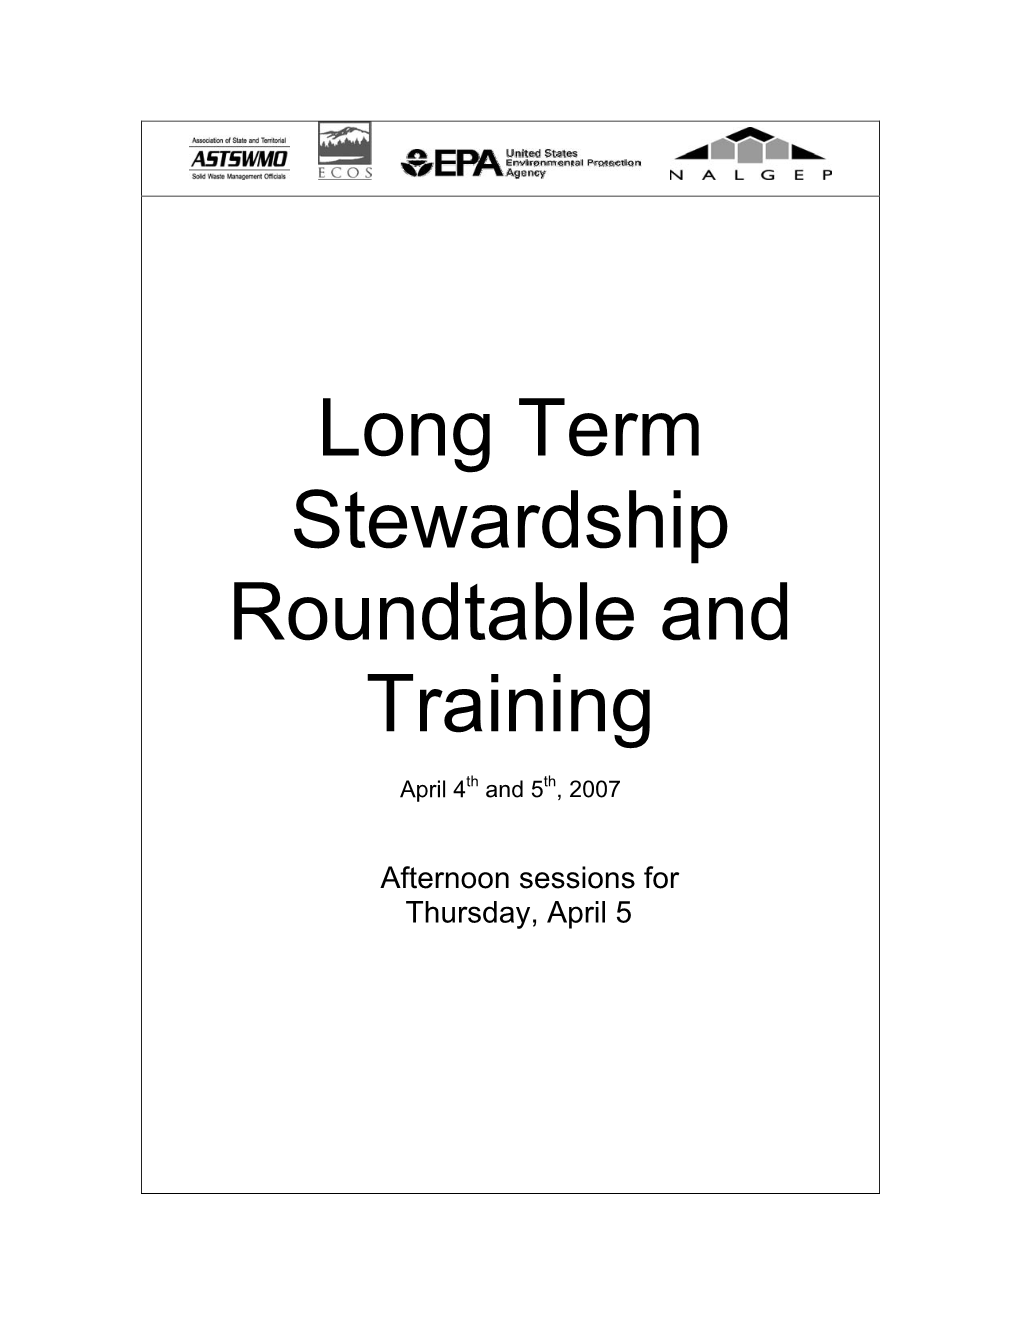 Long Term Stewardship Roundtable and Training: Afternoon Sessions for Thursday, April 5